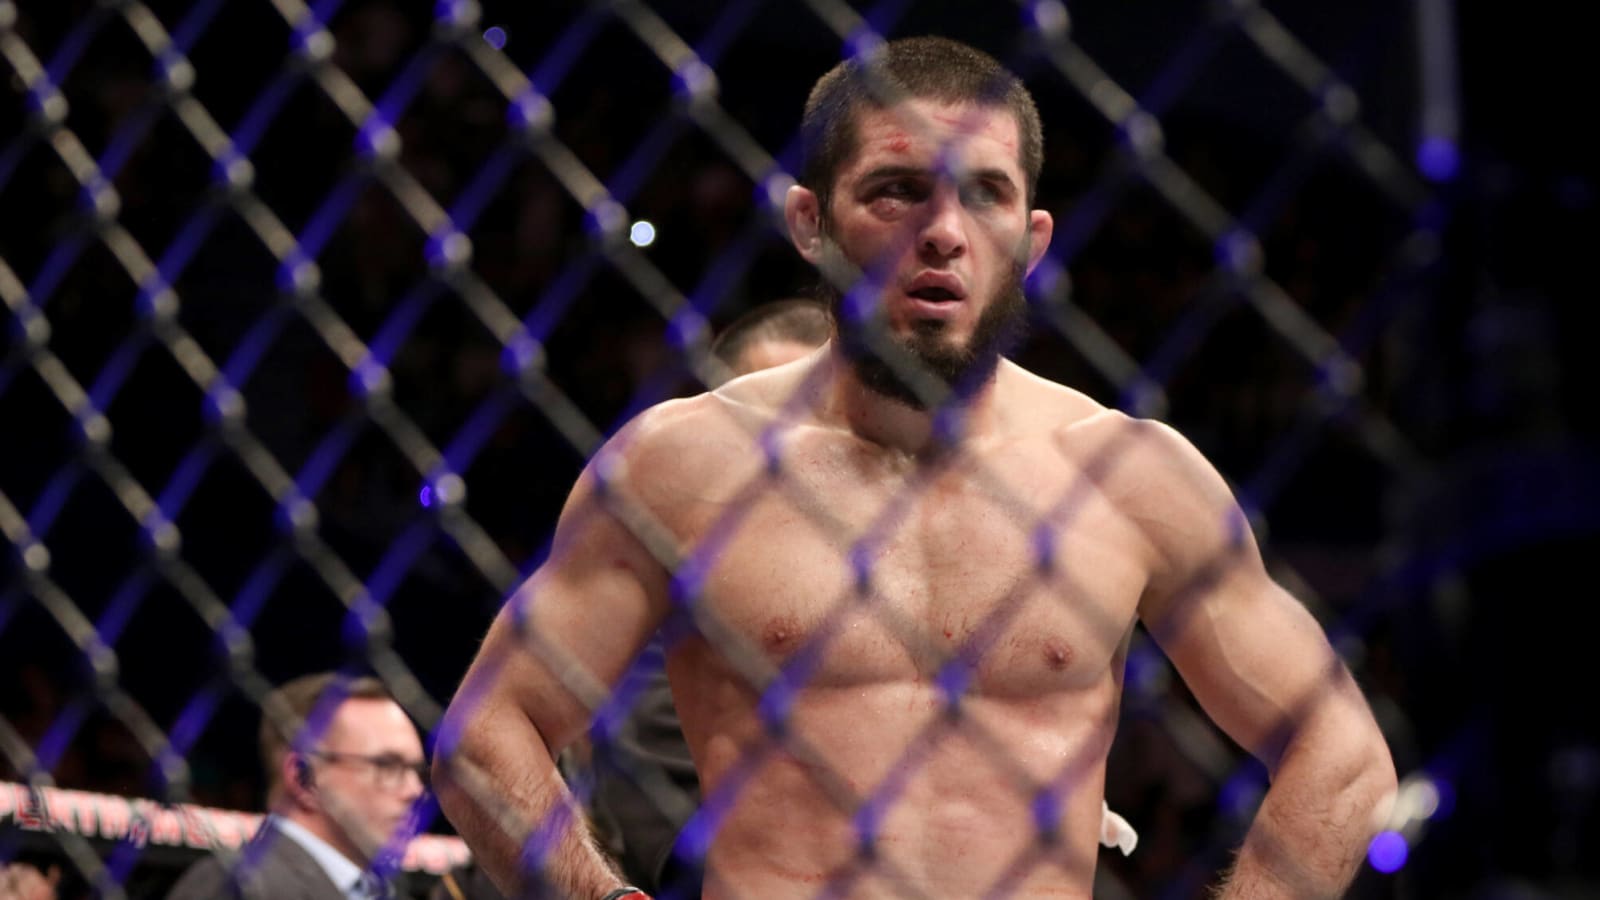 Islam Makhachev's coach outlines 3-fight schedule that ends in champ-champ status